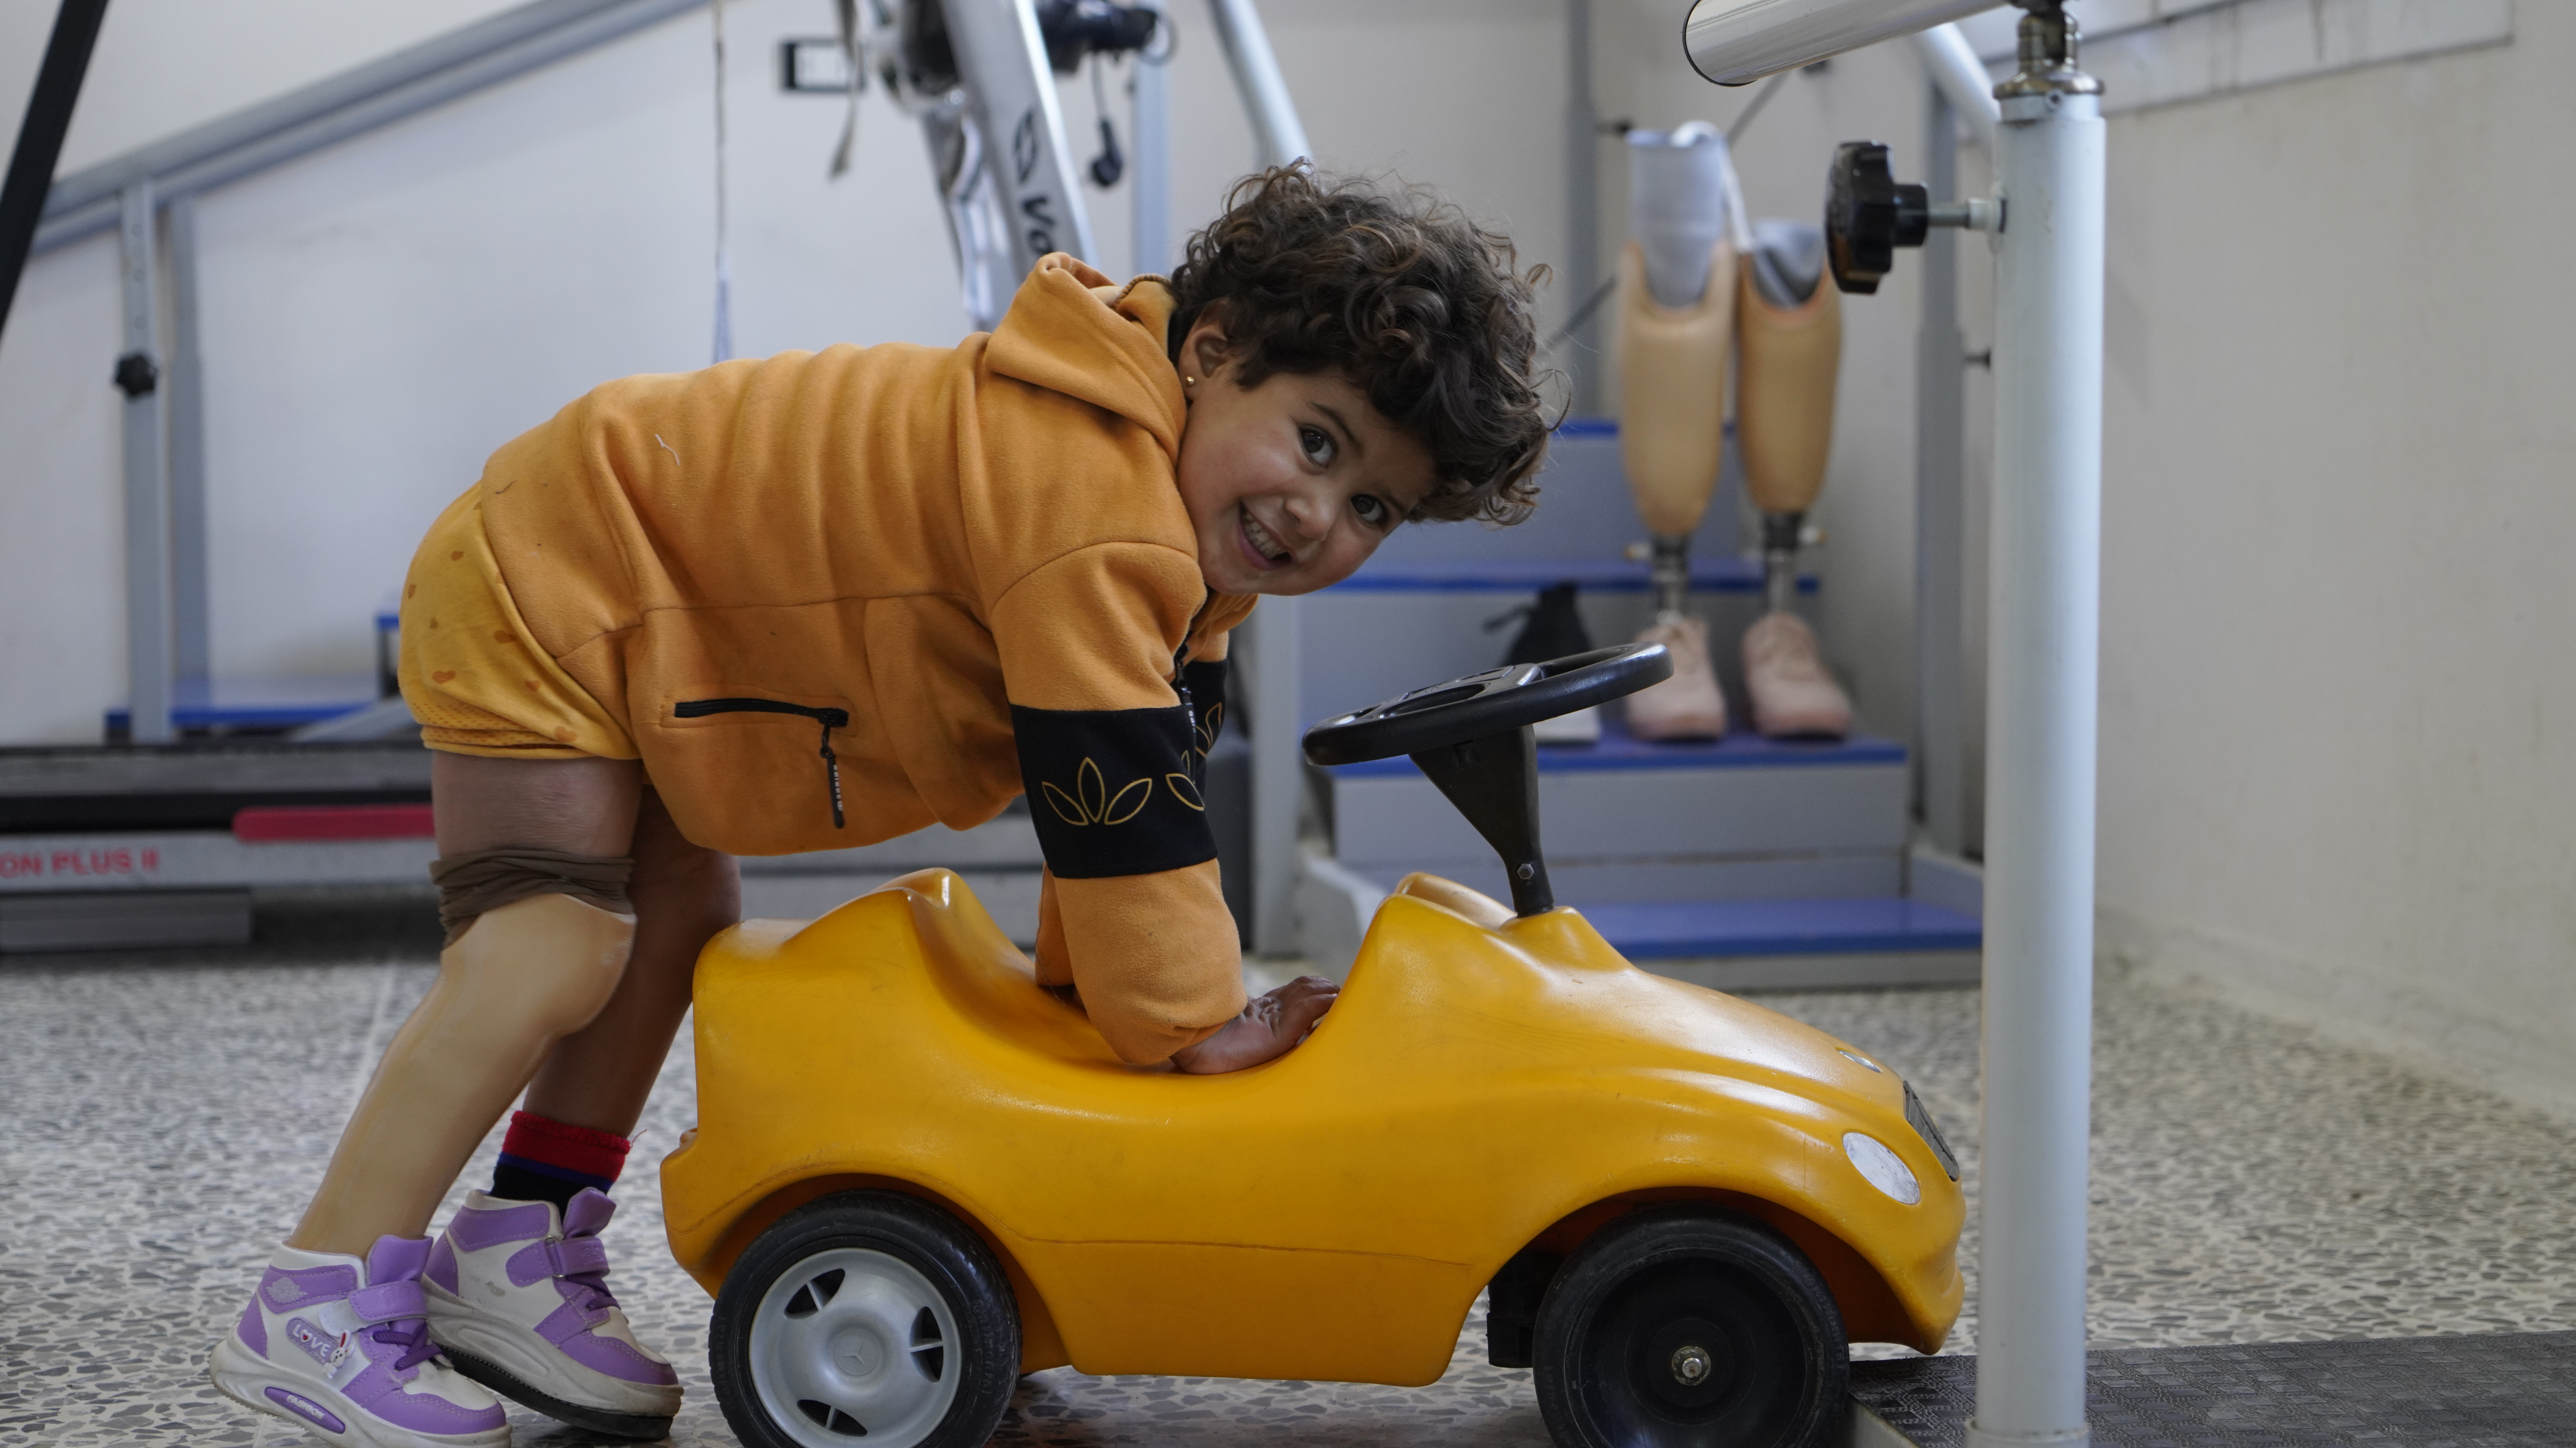 Noor during a rehabilitation session she jumps on a little yellow car smiling at the camera at Aqrabat hospital, HI’s partner in Northwest Syria. ; }}